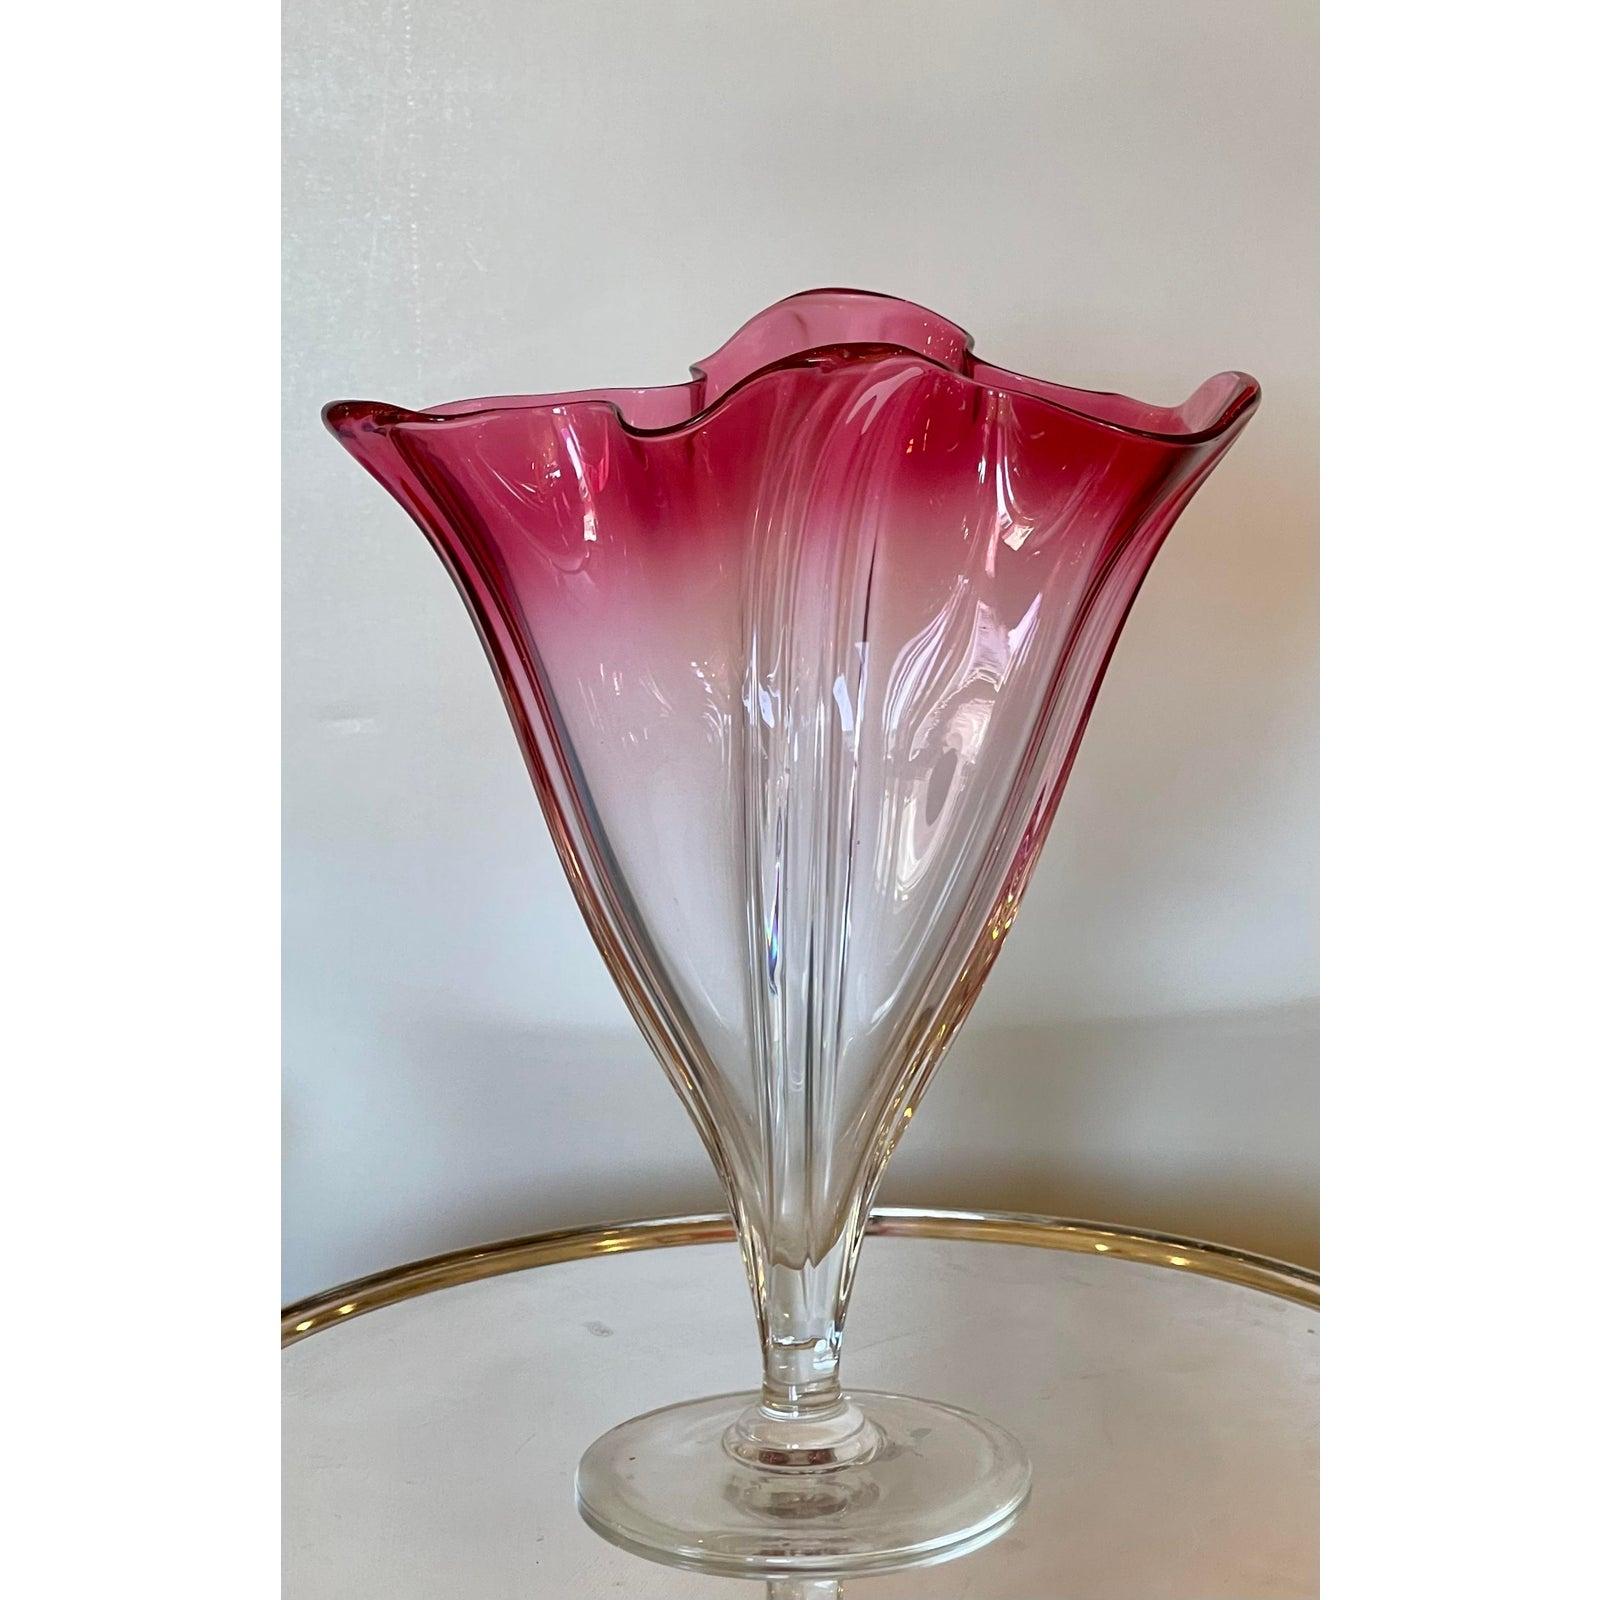 Antique Frederick Carder for Steuben red Steuben Grotesque vase

Additional information:
Materials: Glass
Color: Red
Brand: Steuben
Designer: Steuben
Period: 1920s
Styles: Art Deco
Item Type: Vintage, Antique or Pre-owned
Dimensions: 9.5